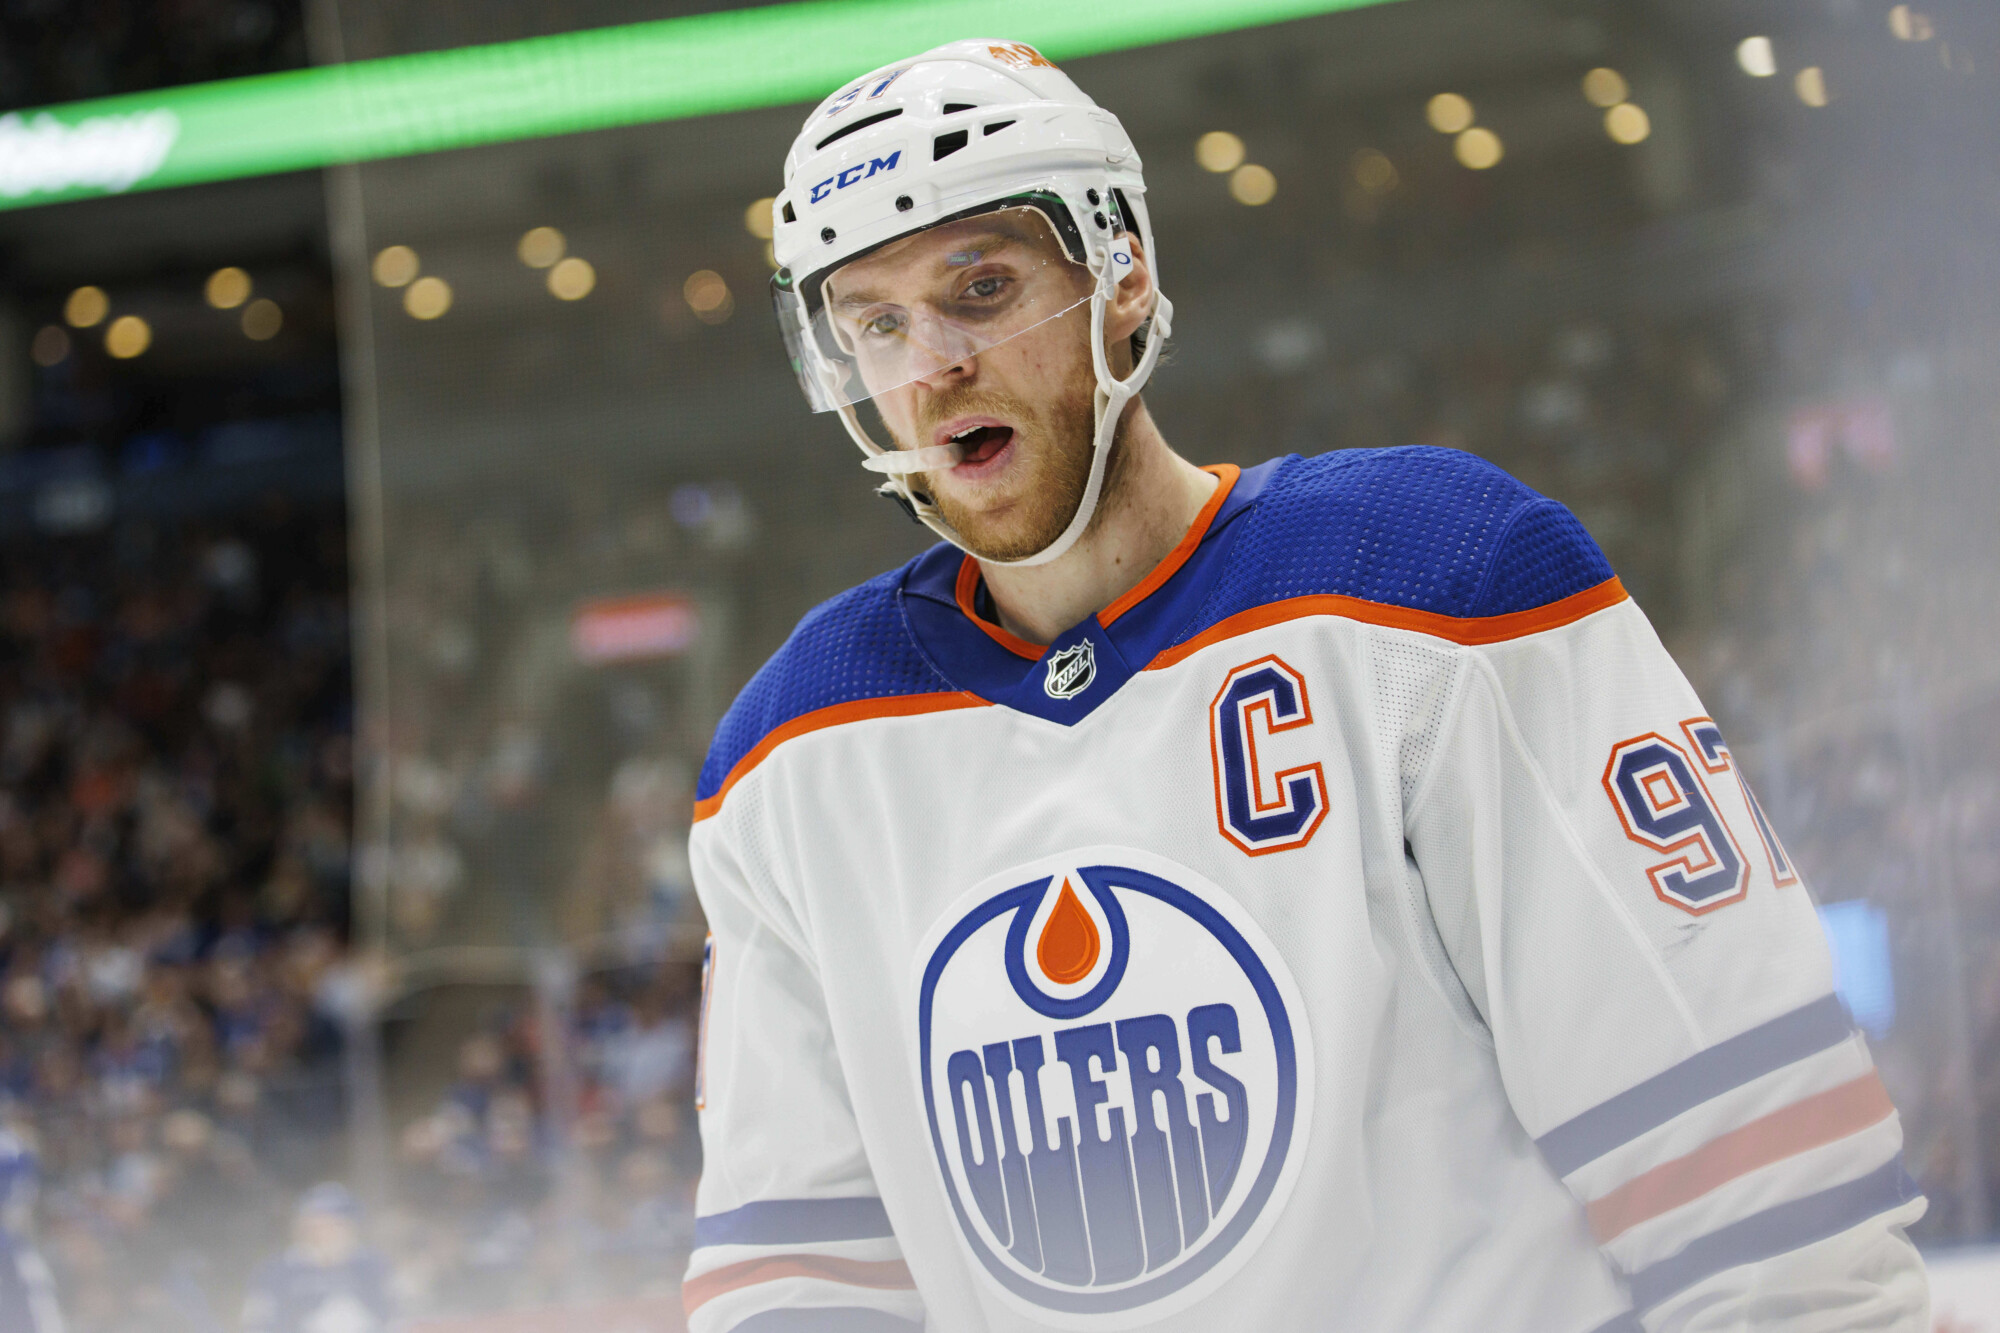 Connor McDavid puts NHL on notice with goal-scoring frenzy